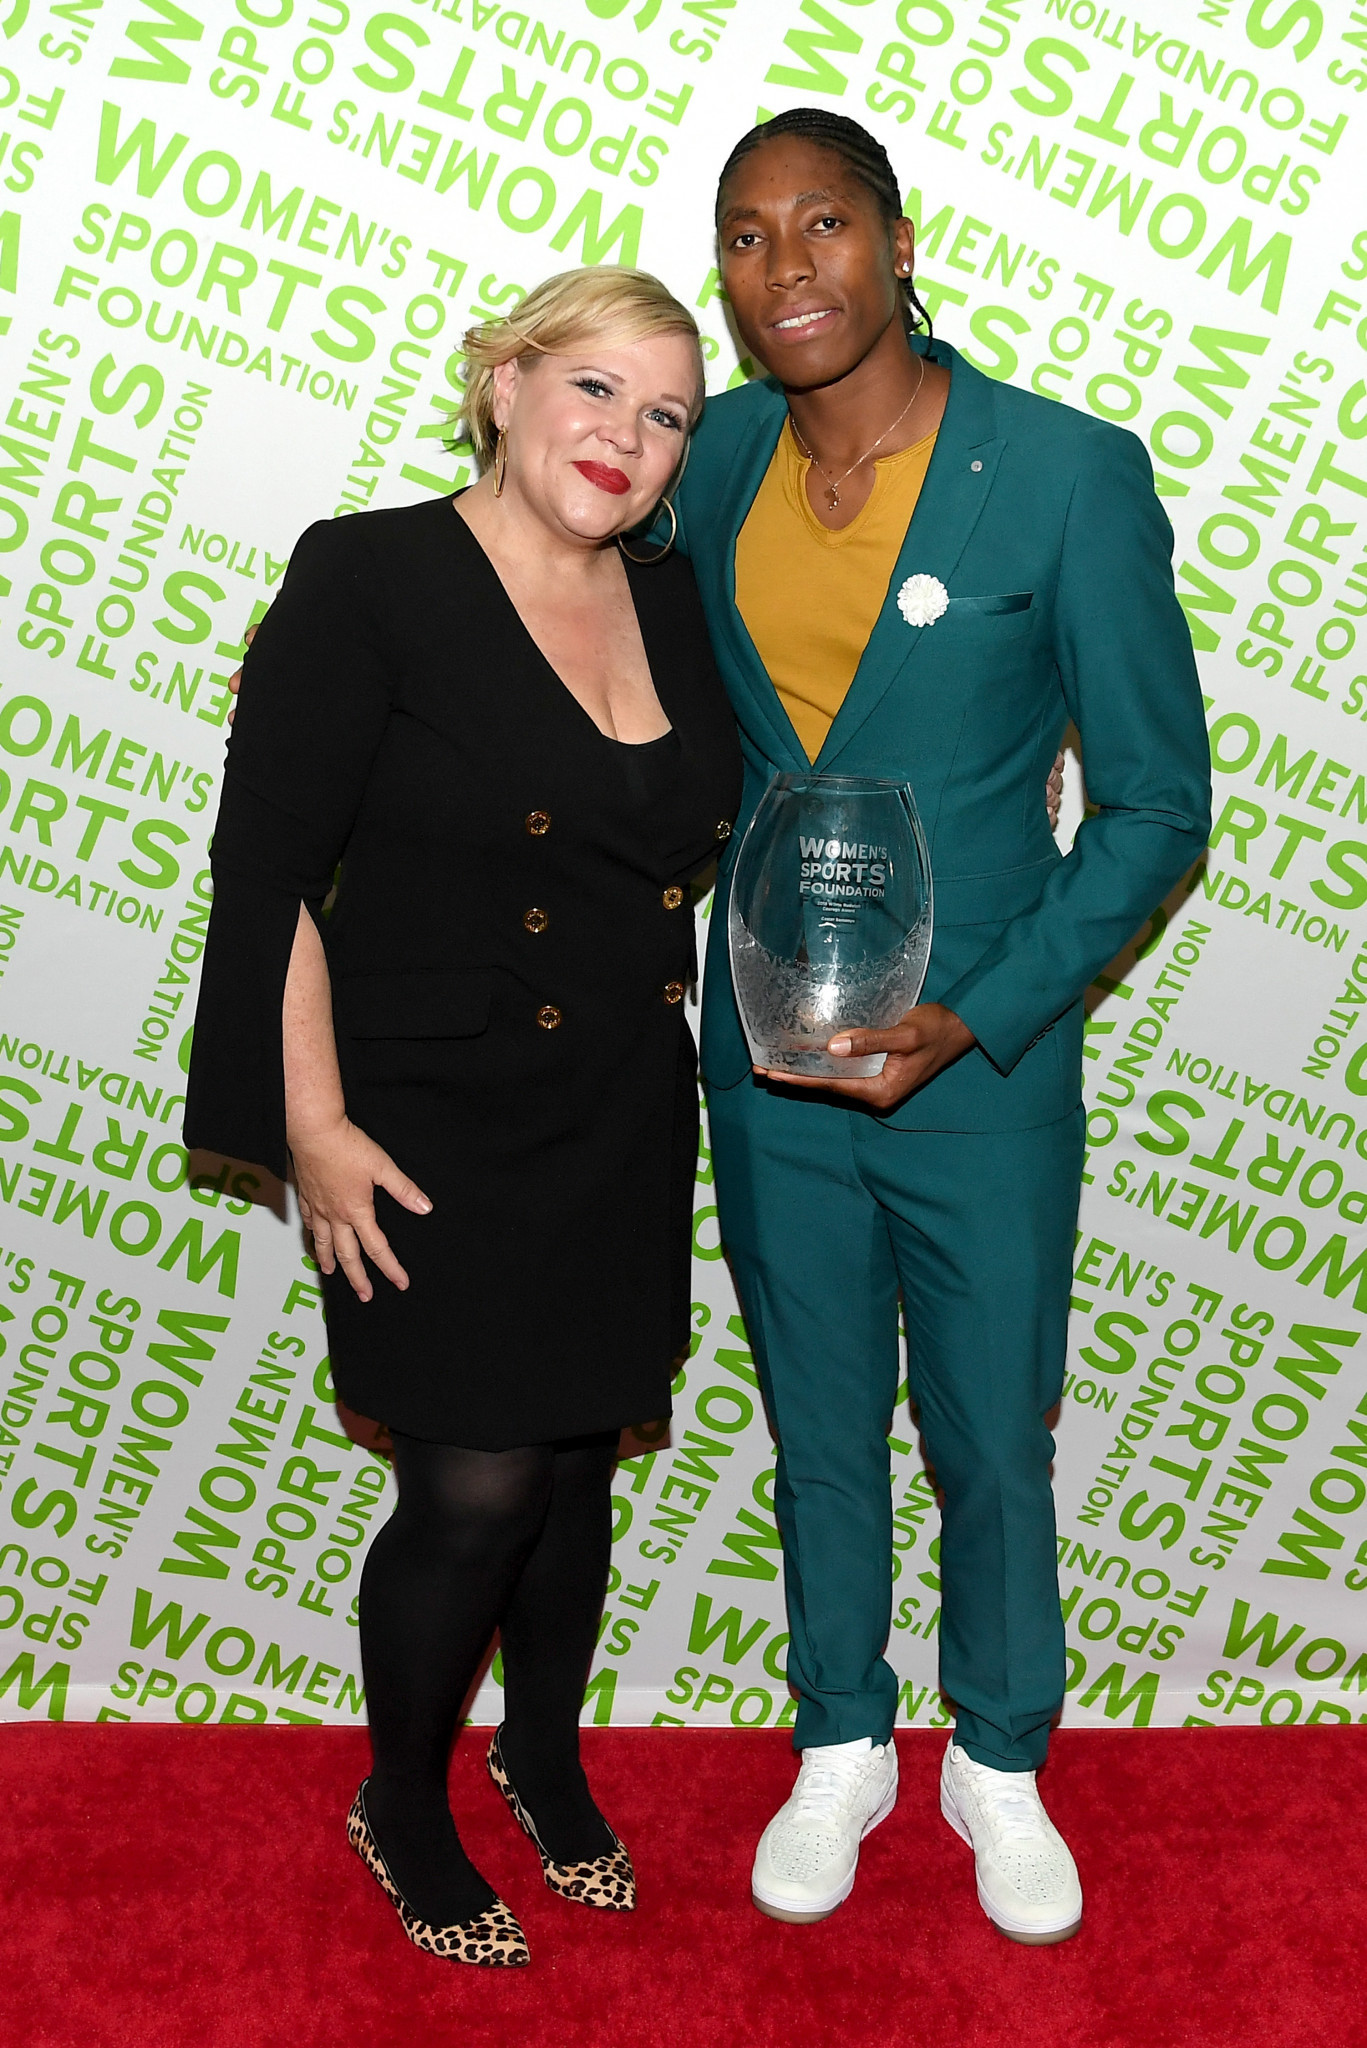 Caster Semenya, right, pictured with presenter Holly Rowe was presented with the Wilma Rudolph Courage Award at the Women’s Sports Foundation Annual Salute to Women in Sports ceremony ©Getty Images 